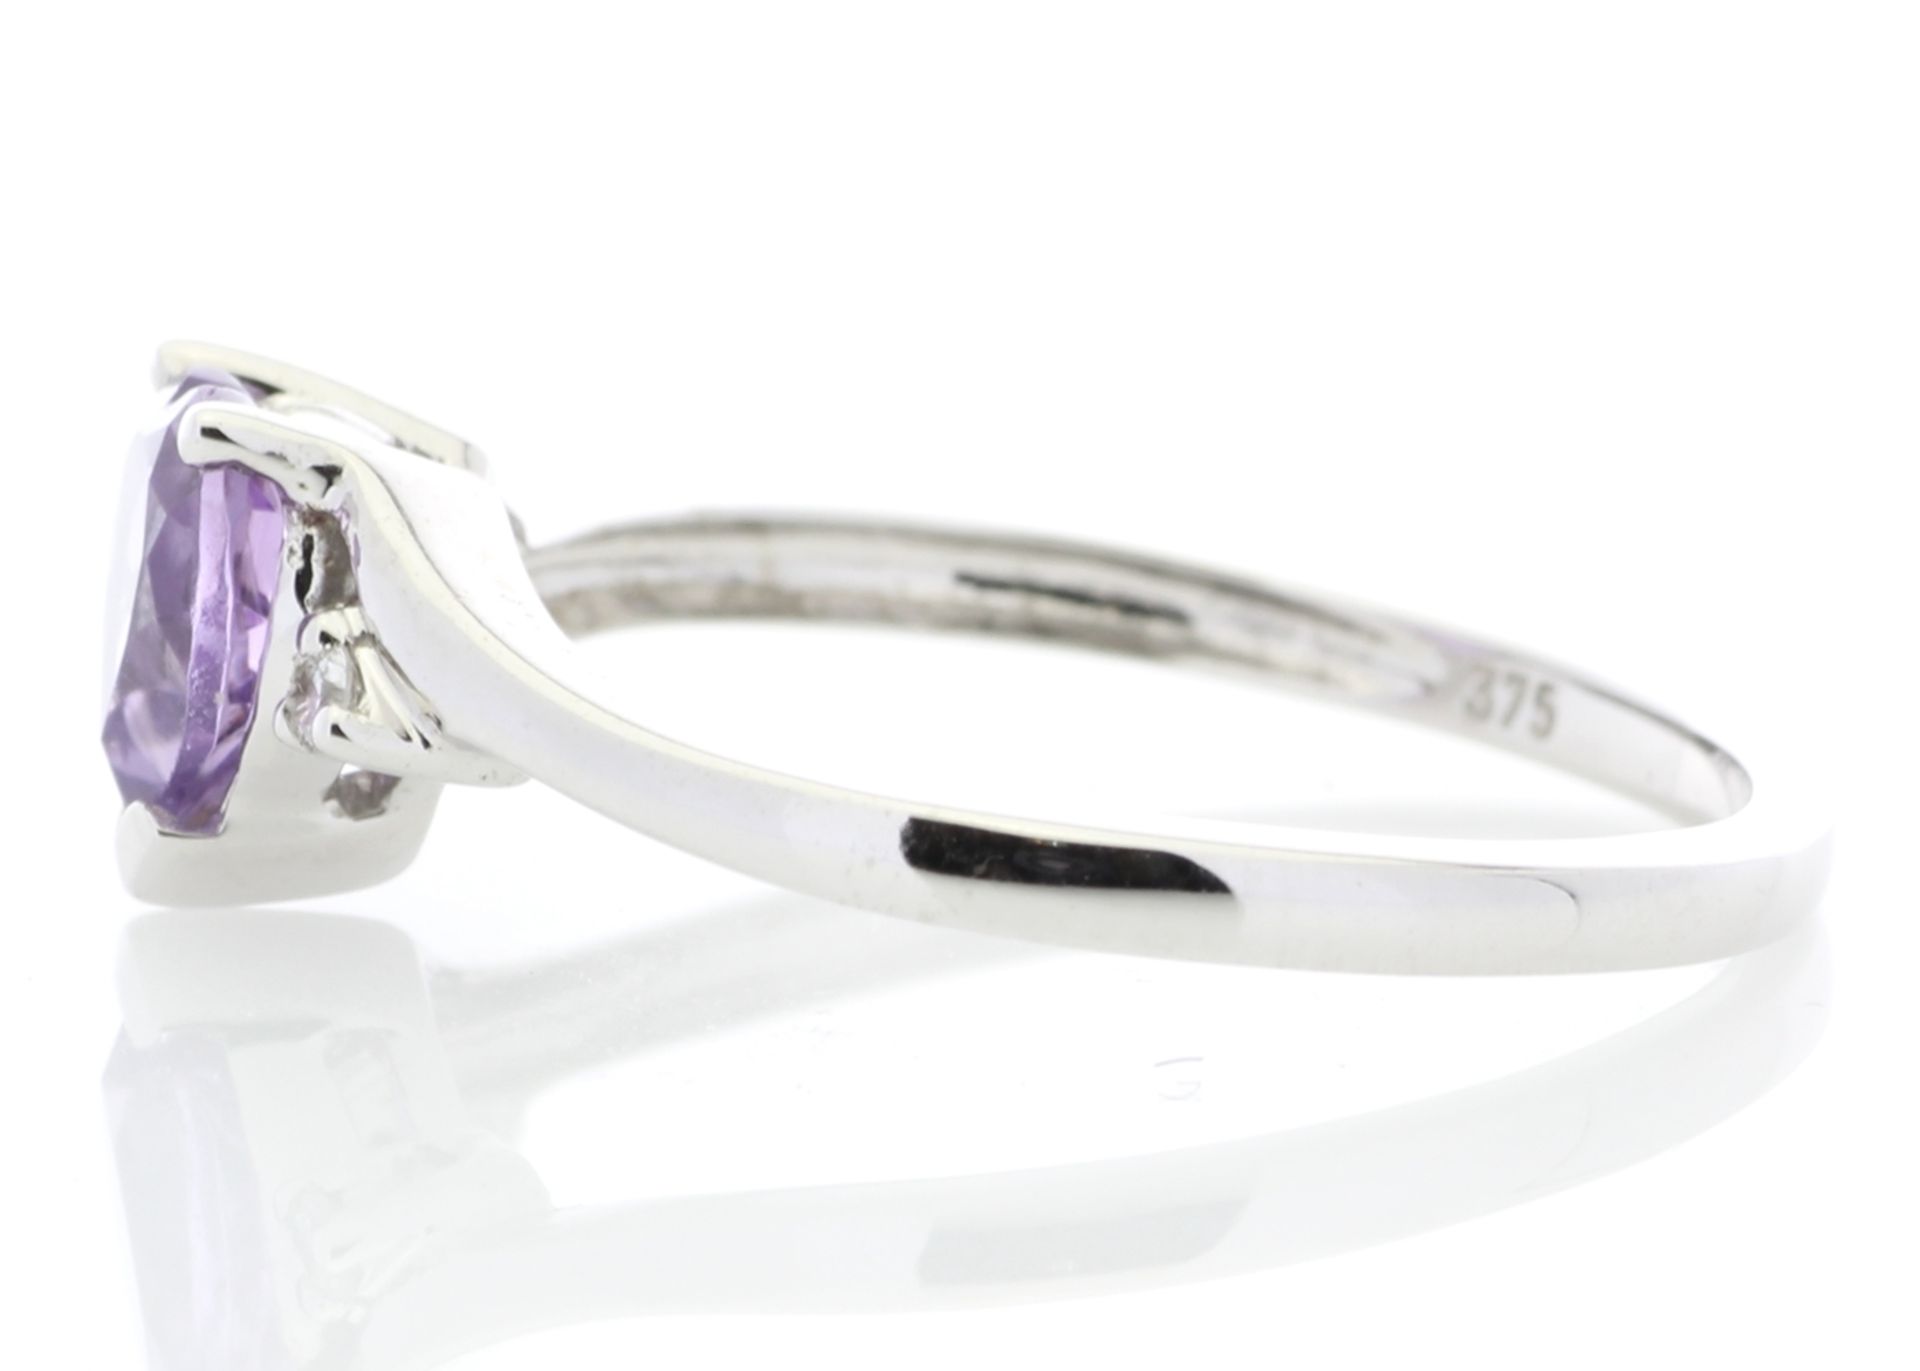 8180072A-, *** RRP £1,045.00*** UNUSED - Certified by GIE 9ct White Gold Amethyst Diamond Ring 0. - Image 2 of 4